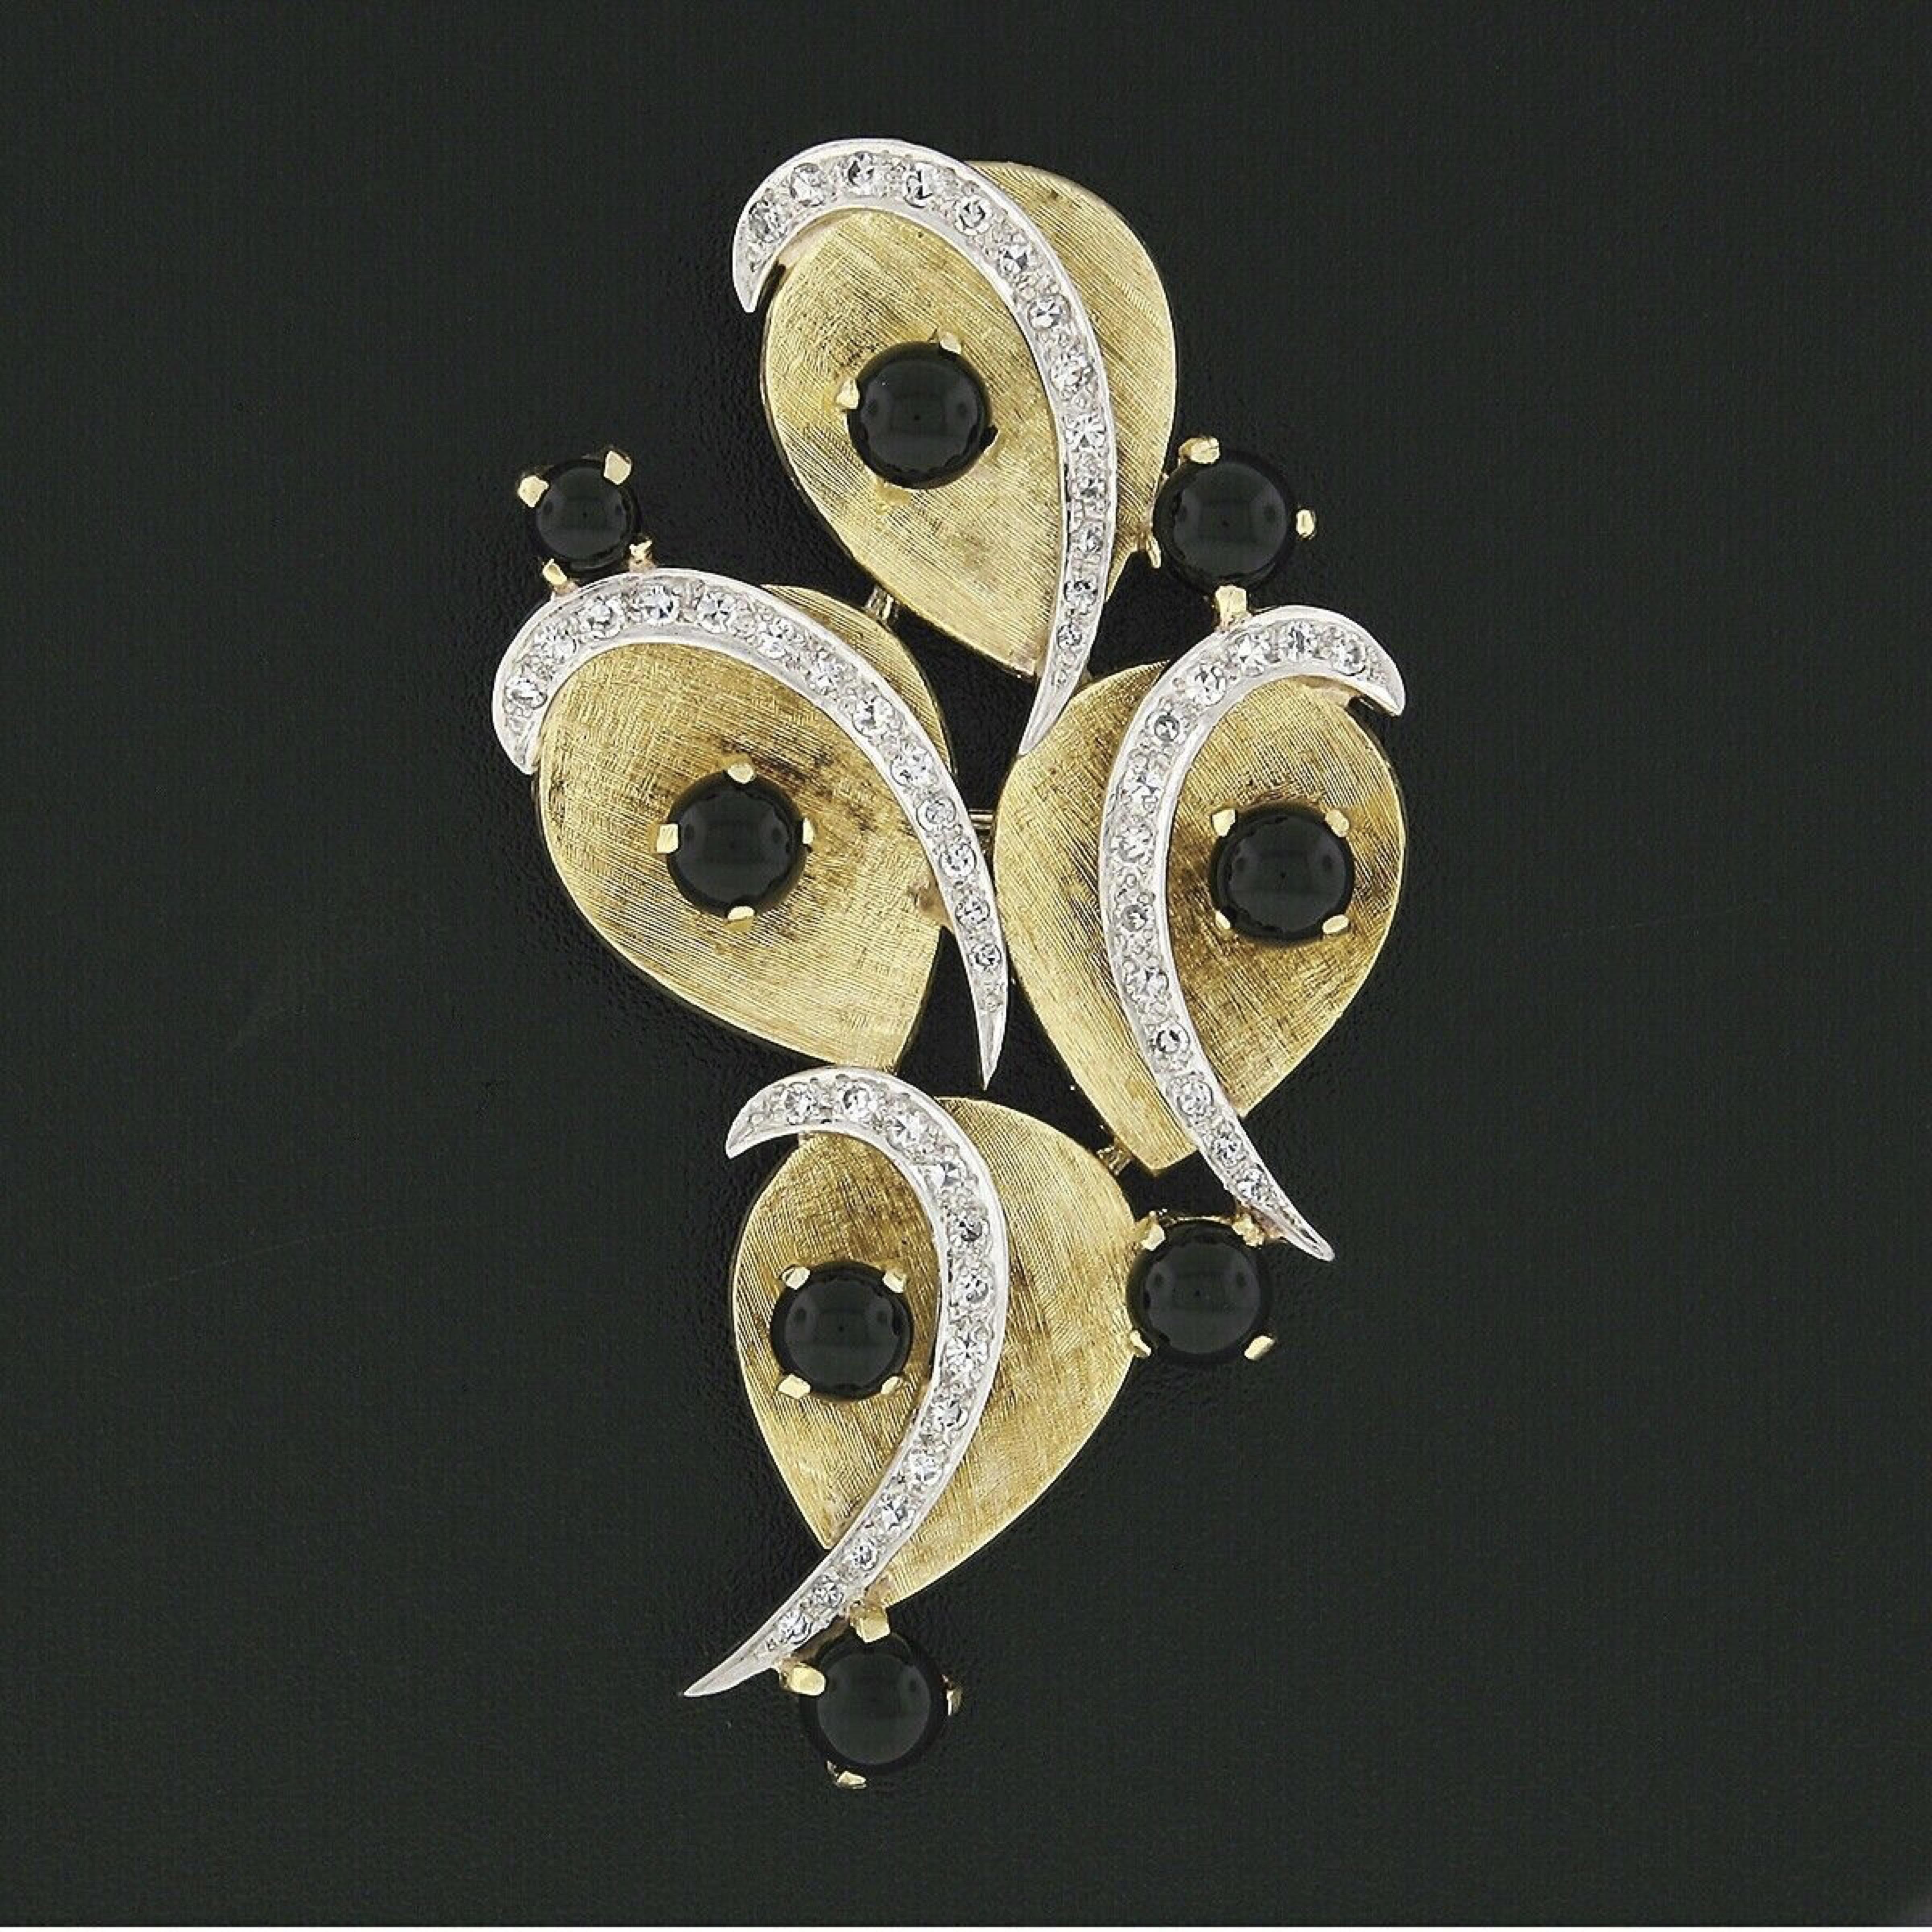 This absolutely magnificent vintage brooch or pendant was crafted from solid 18k yellow gold with white gold accents that are lined with fine diamonds throughout. The piece consists of four concave teardrop designs showing a beautiful Florentine